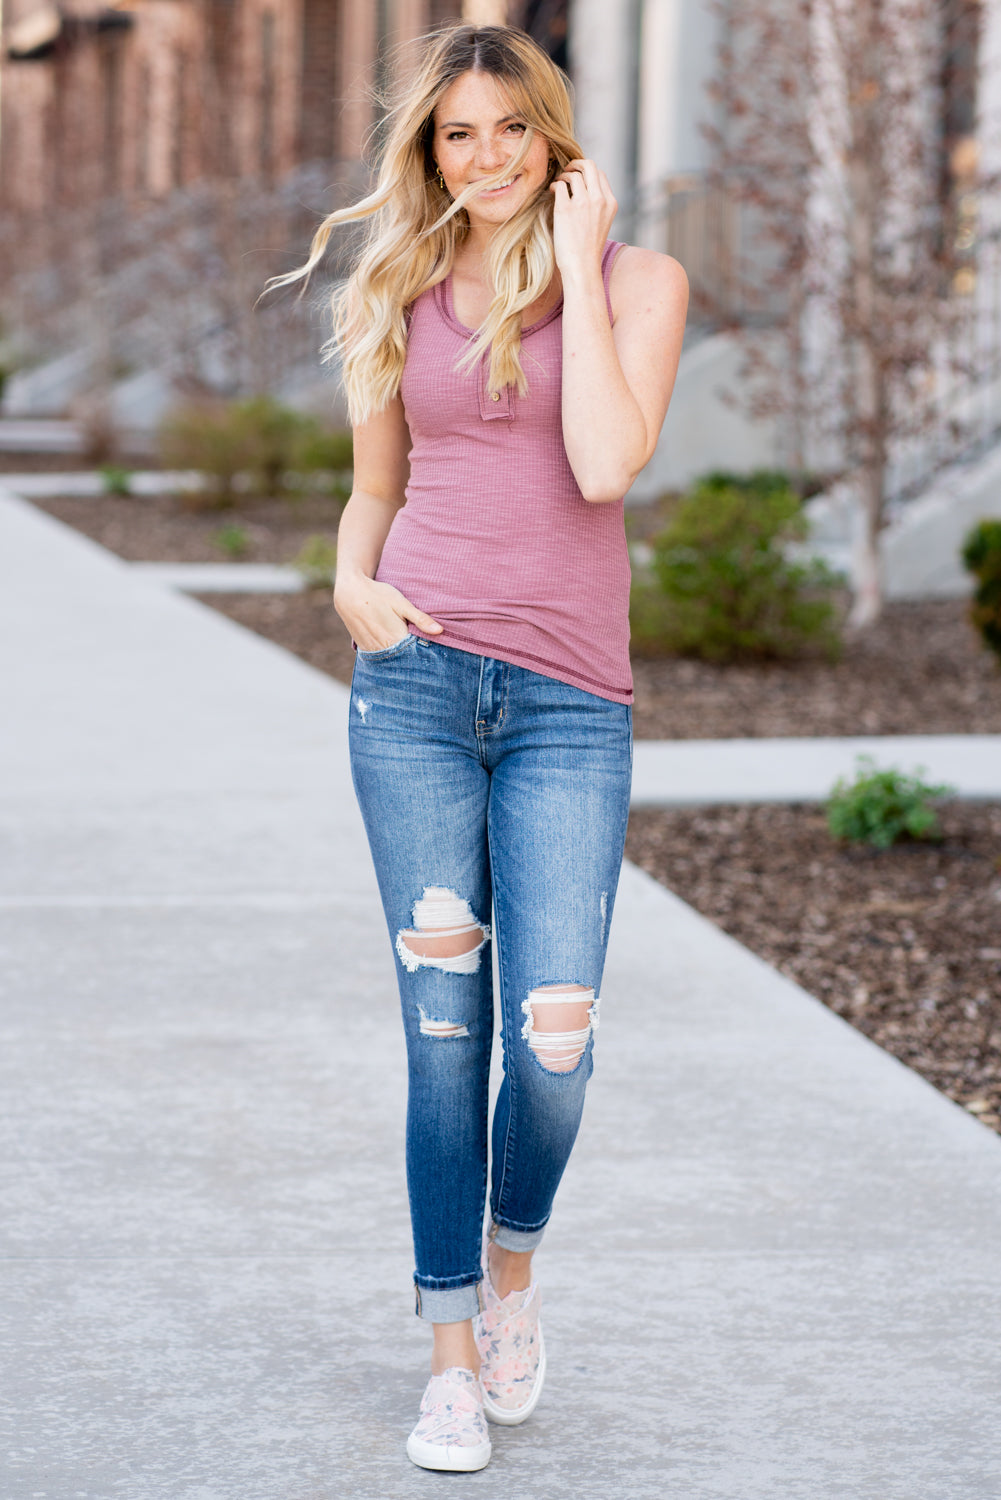 This sleeveless Henley top is great for layering up or down during spring & summer and pairs well with any denim.  Collection: Spring 2021 Color: Berry Button Up Front Henley  Neckline: Round Sleeve: Sleeveless  Material: 60% POLYESTER/32% COTTON/8% SPAN Style #: JAT7478-Berry Contact us if you have any questions about sizing or fit.